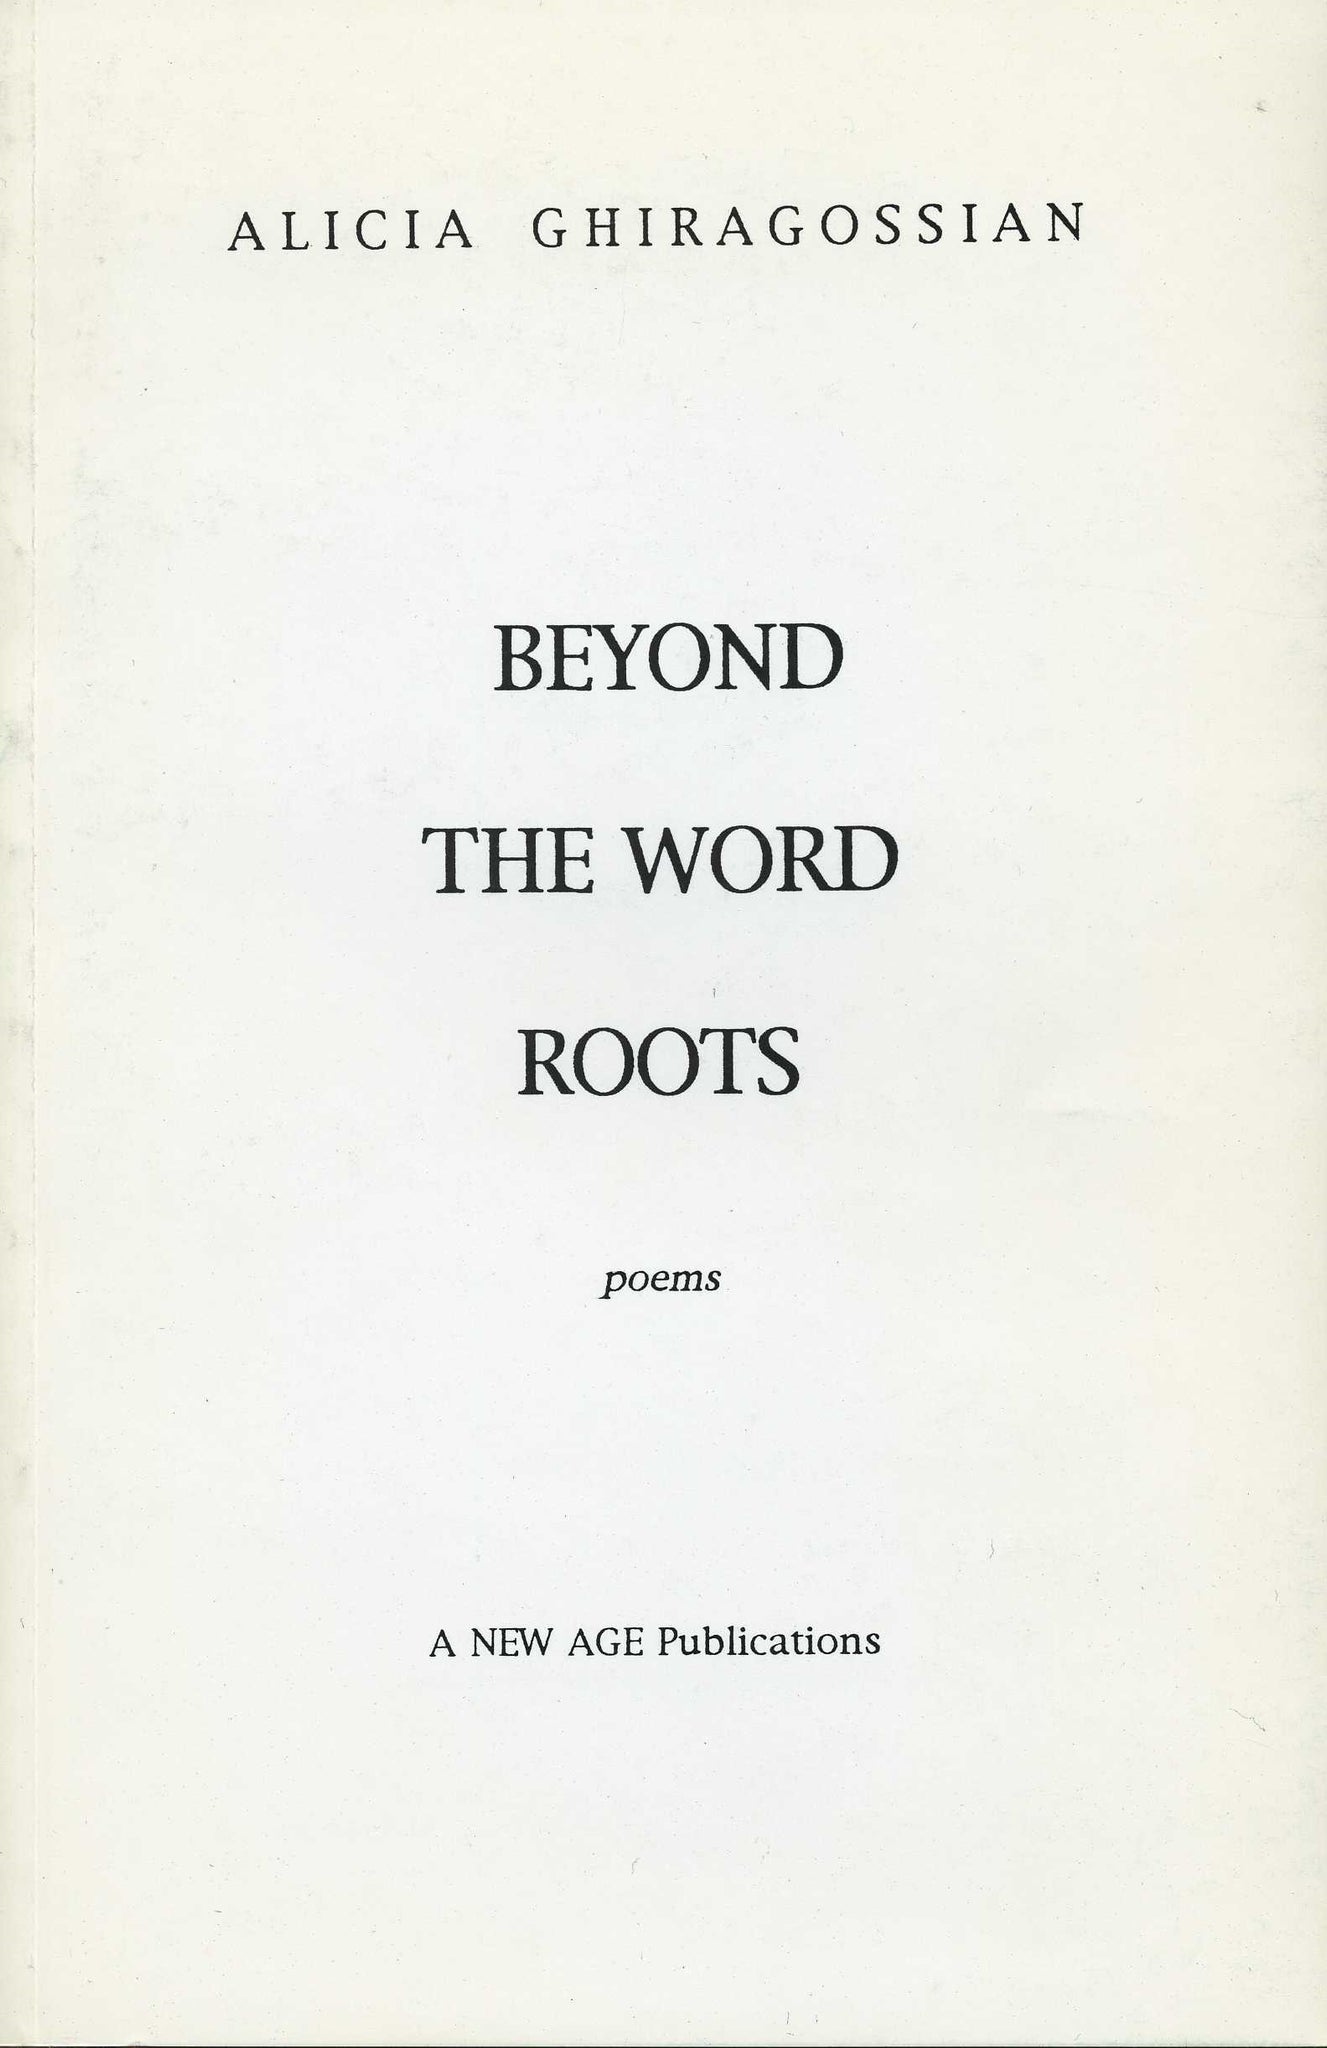 BEYOND THE WORD ROOTS